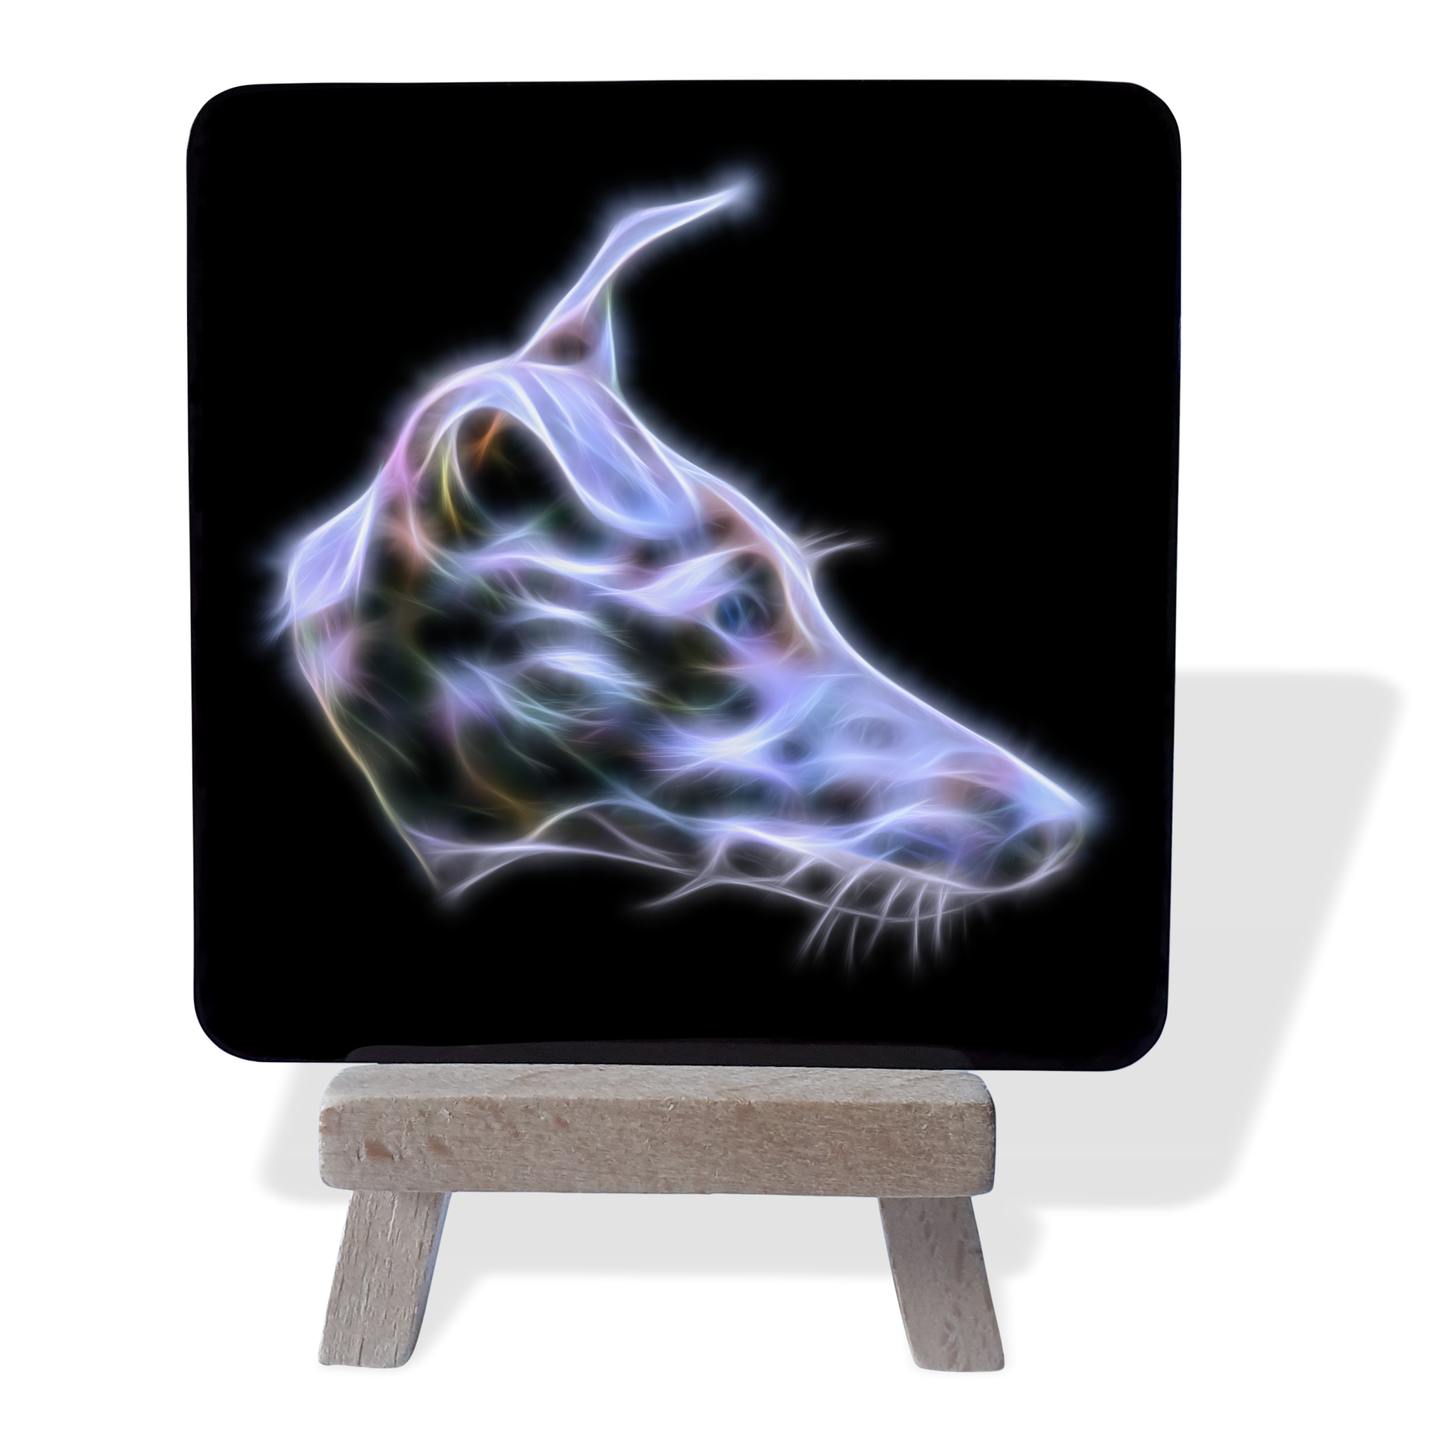 Blue Whippet #1 Metal Plaque and Mini Easel with Fractal Art Design